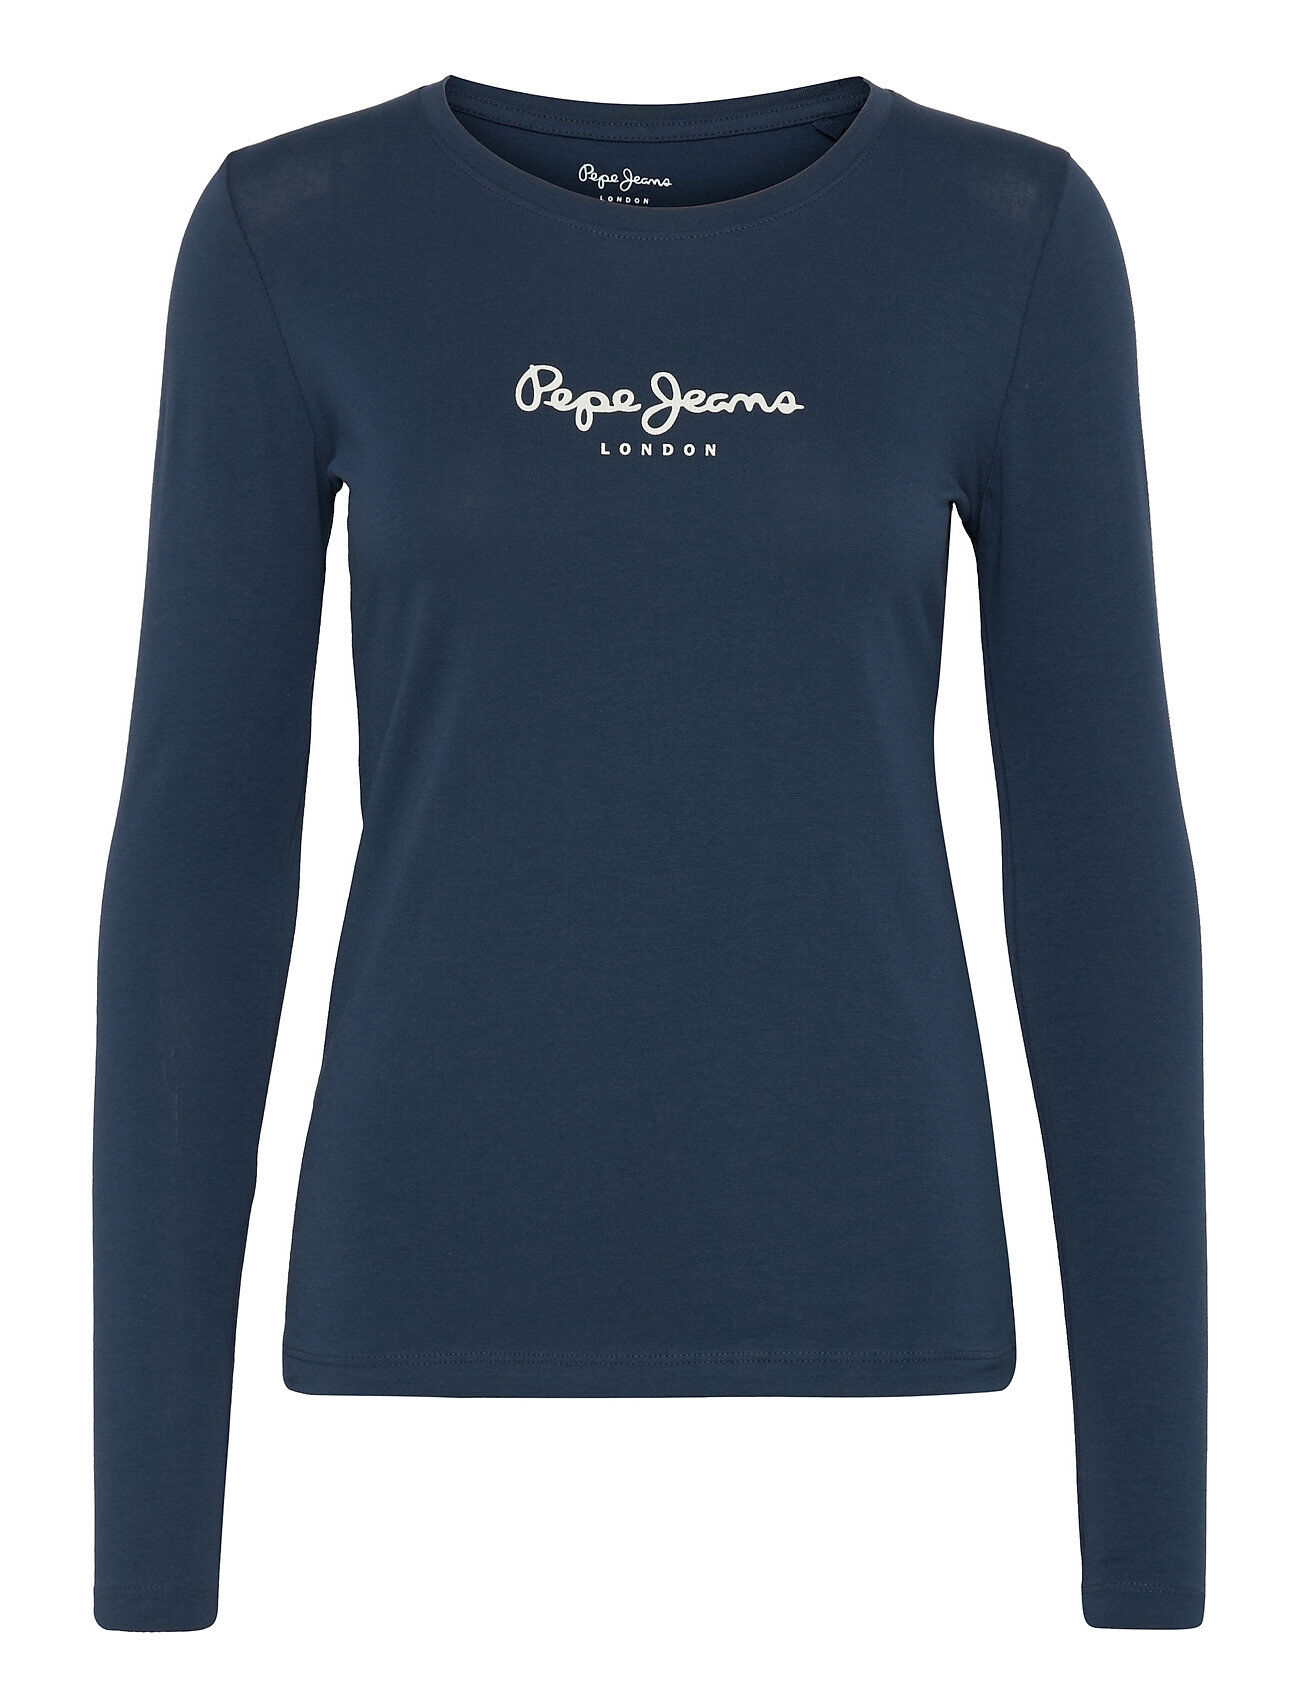 Pepe Jeans London New Virginia Ls T-shirts & Tops Long-sleeved Blå Pepe Jeans London